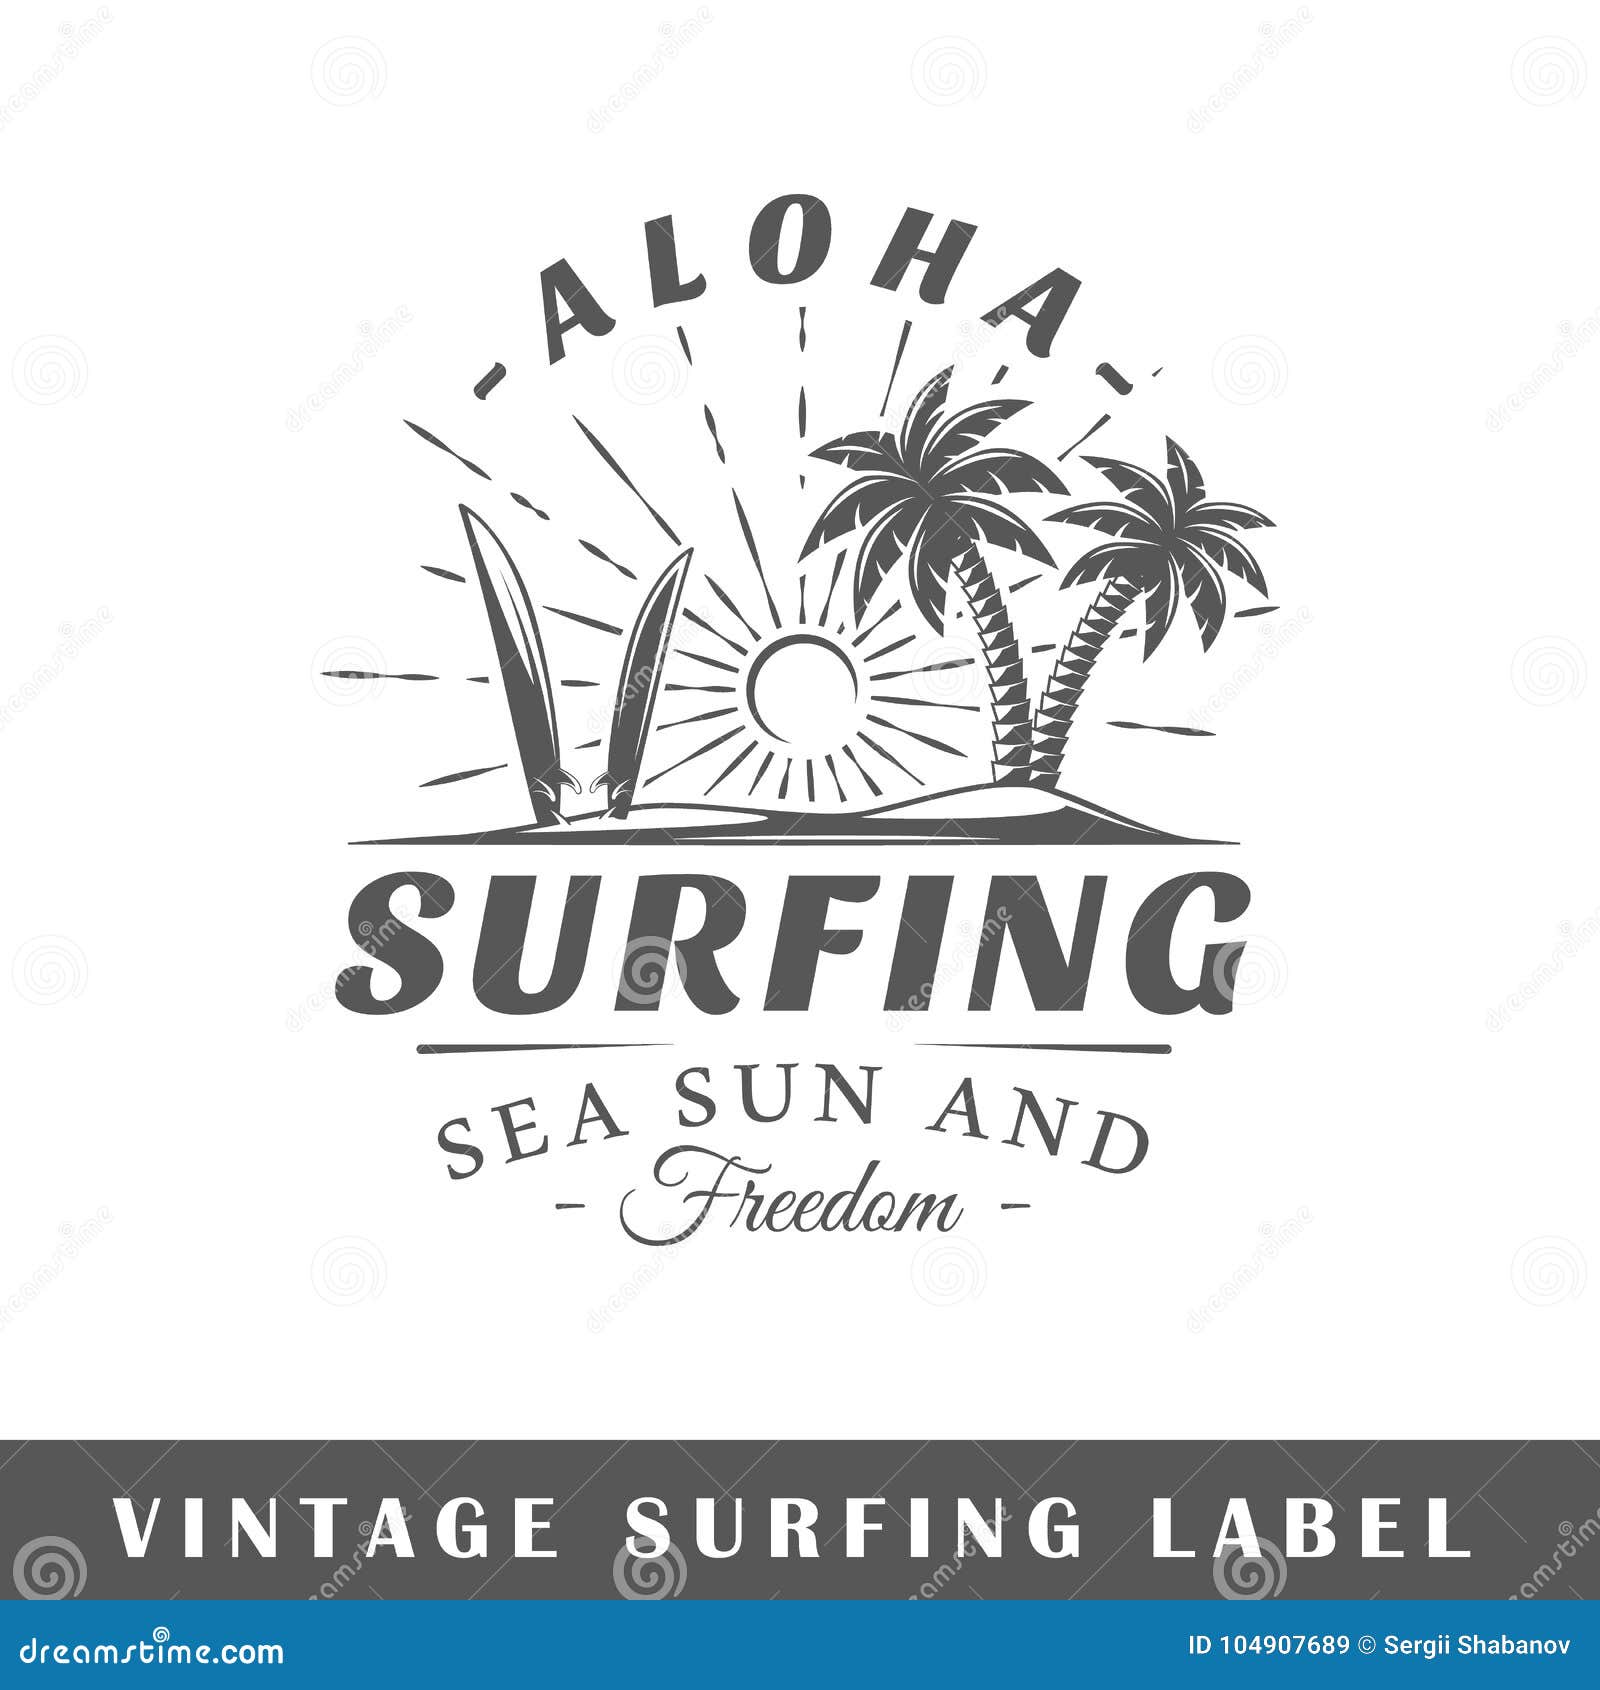 Surfing label template stock vector. Illustration of insignia - 104907689